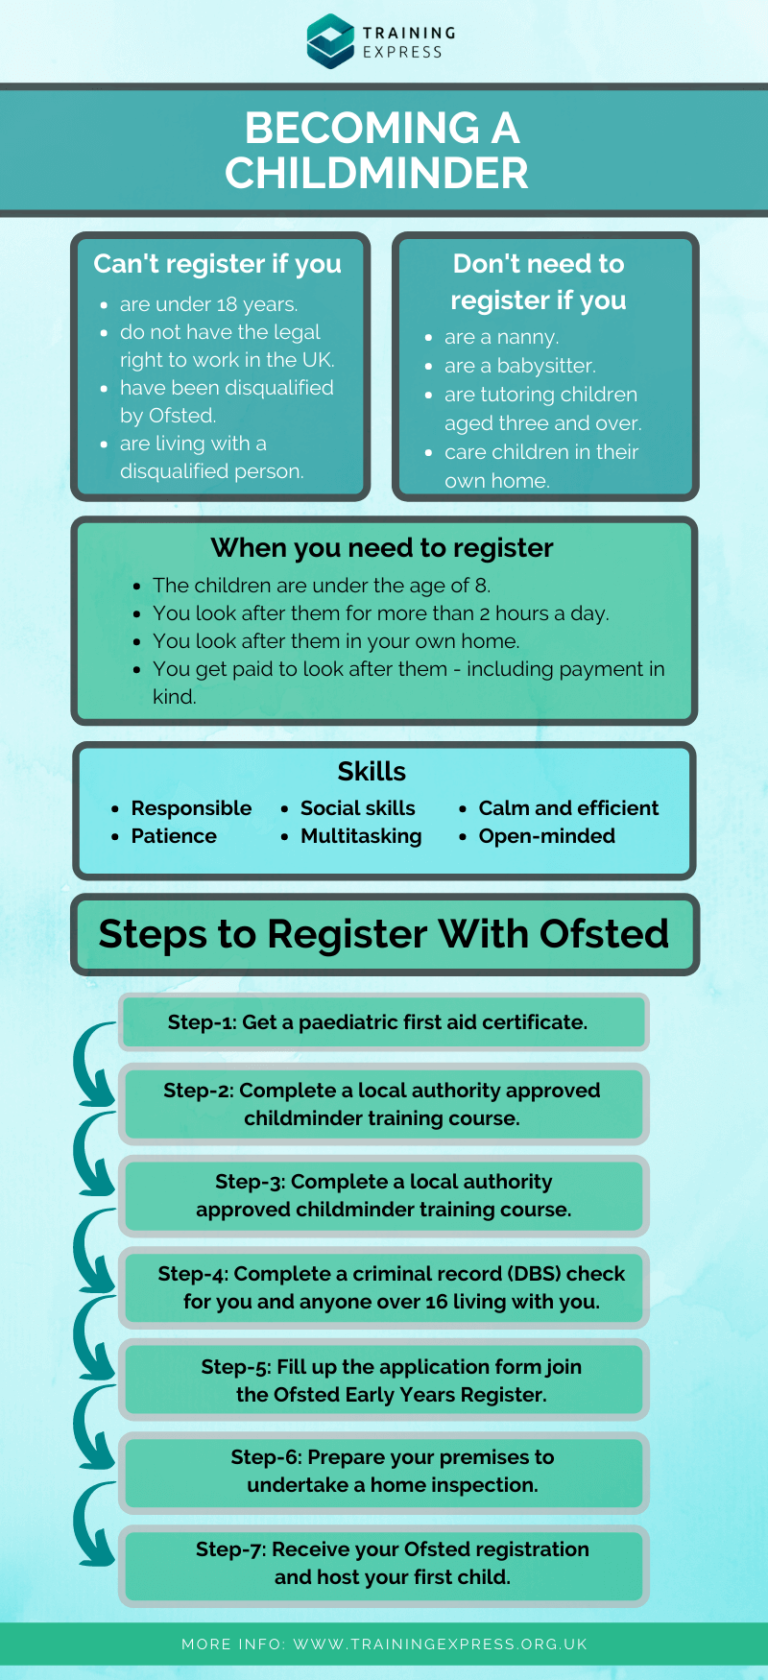 Infographics on becoming a childminder - Skills and steps to follow